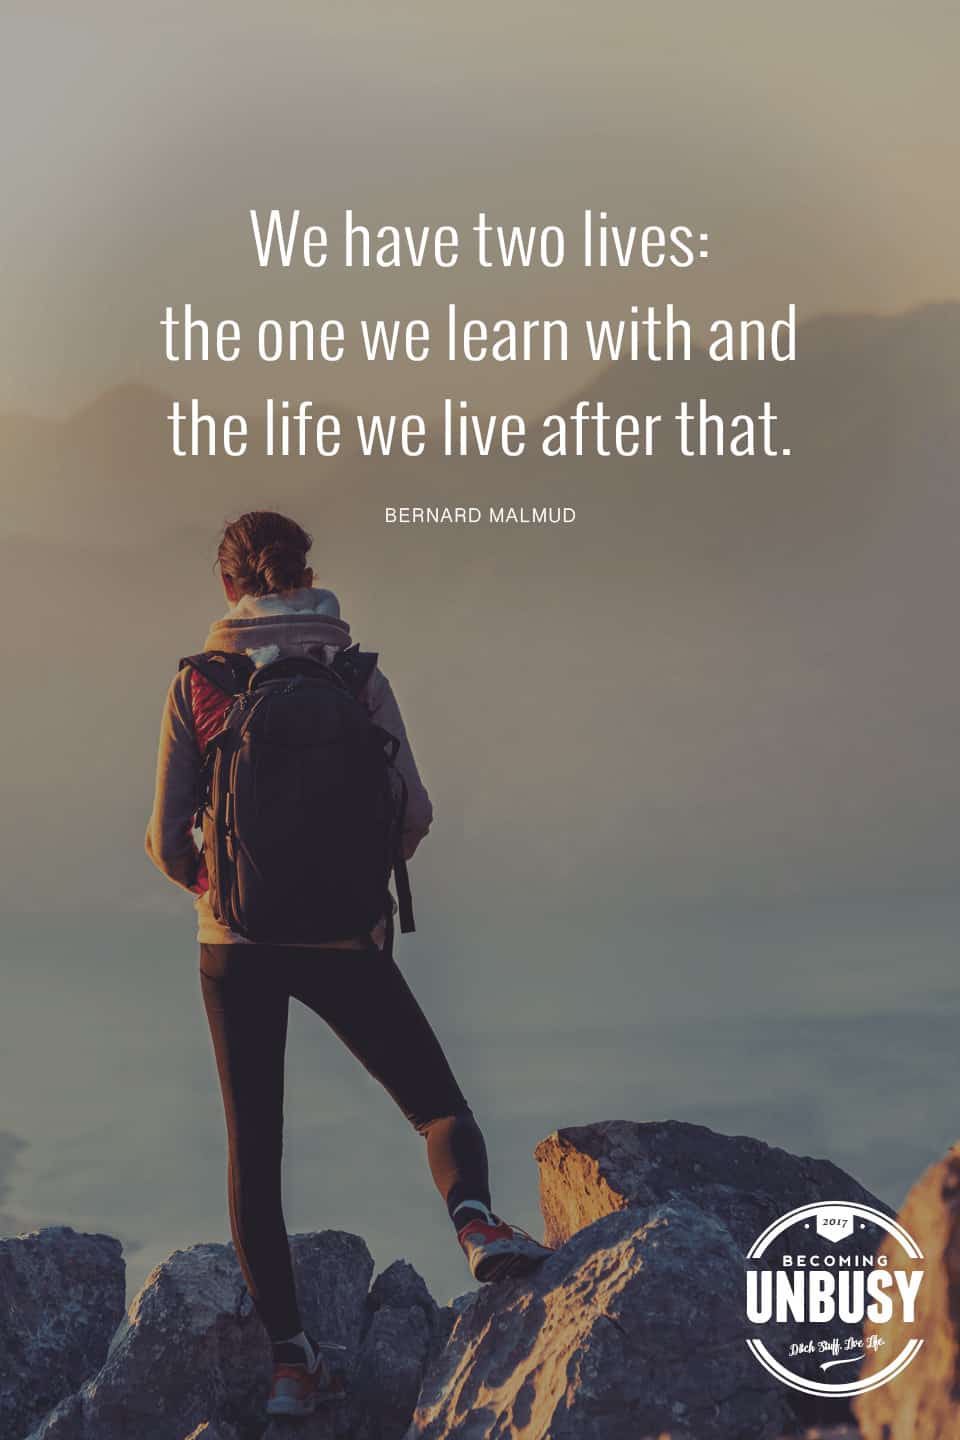 We have two lives: the one we learn with and the life we live after that. — Bernard Malmud *Love this quote and these life list ideas. Great suggestions.